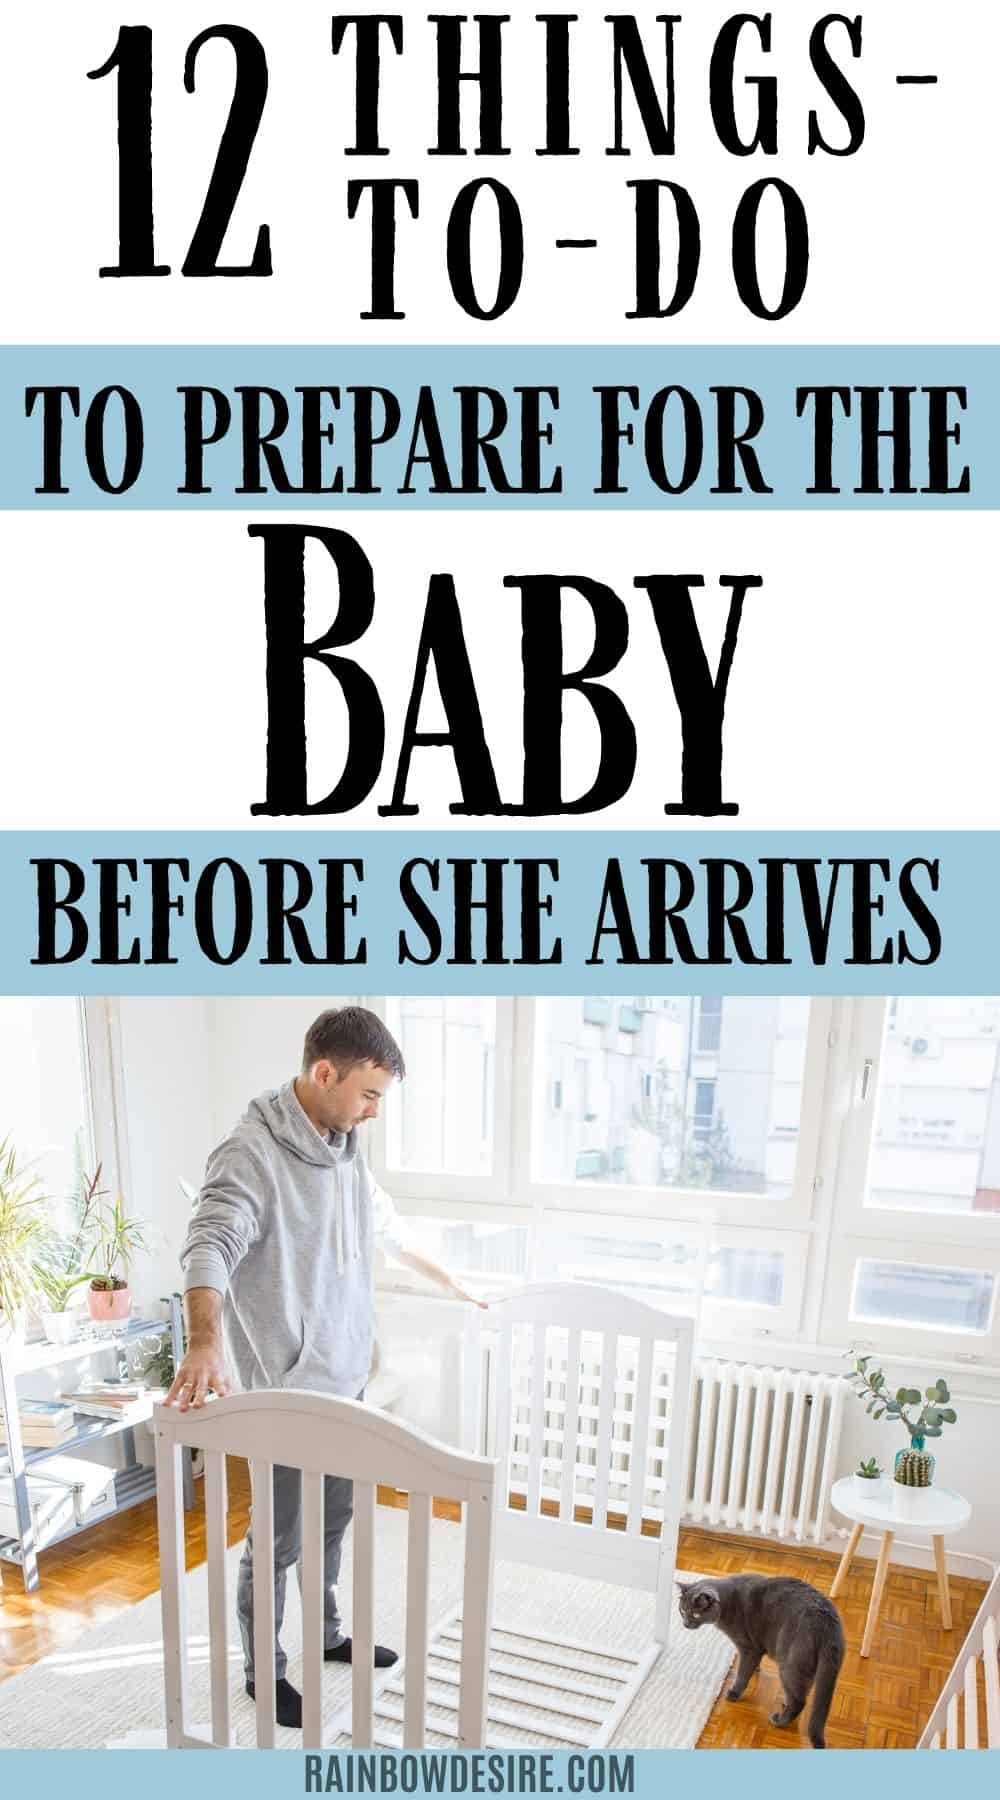 12 things new parents must do before the baby arrives | Rainbow Desire